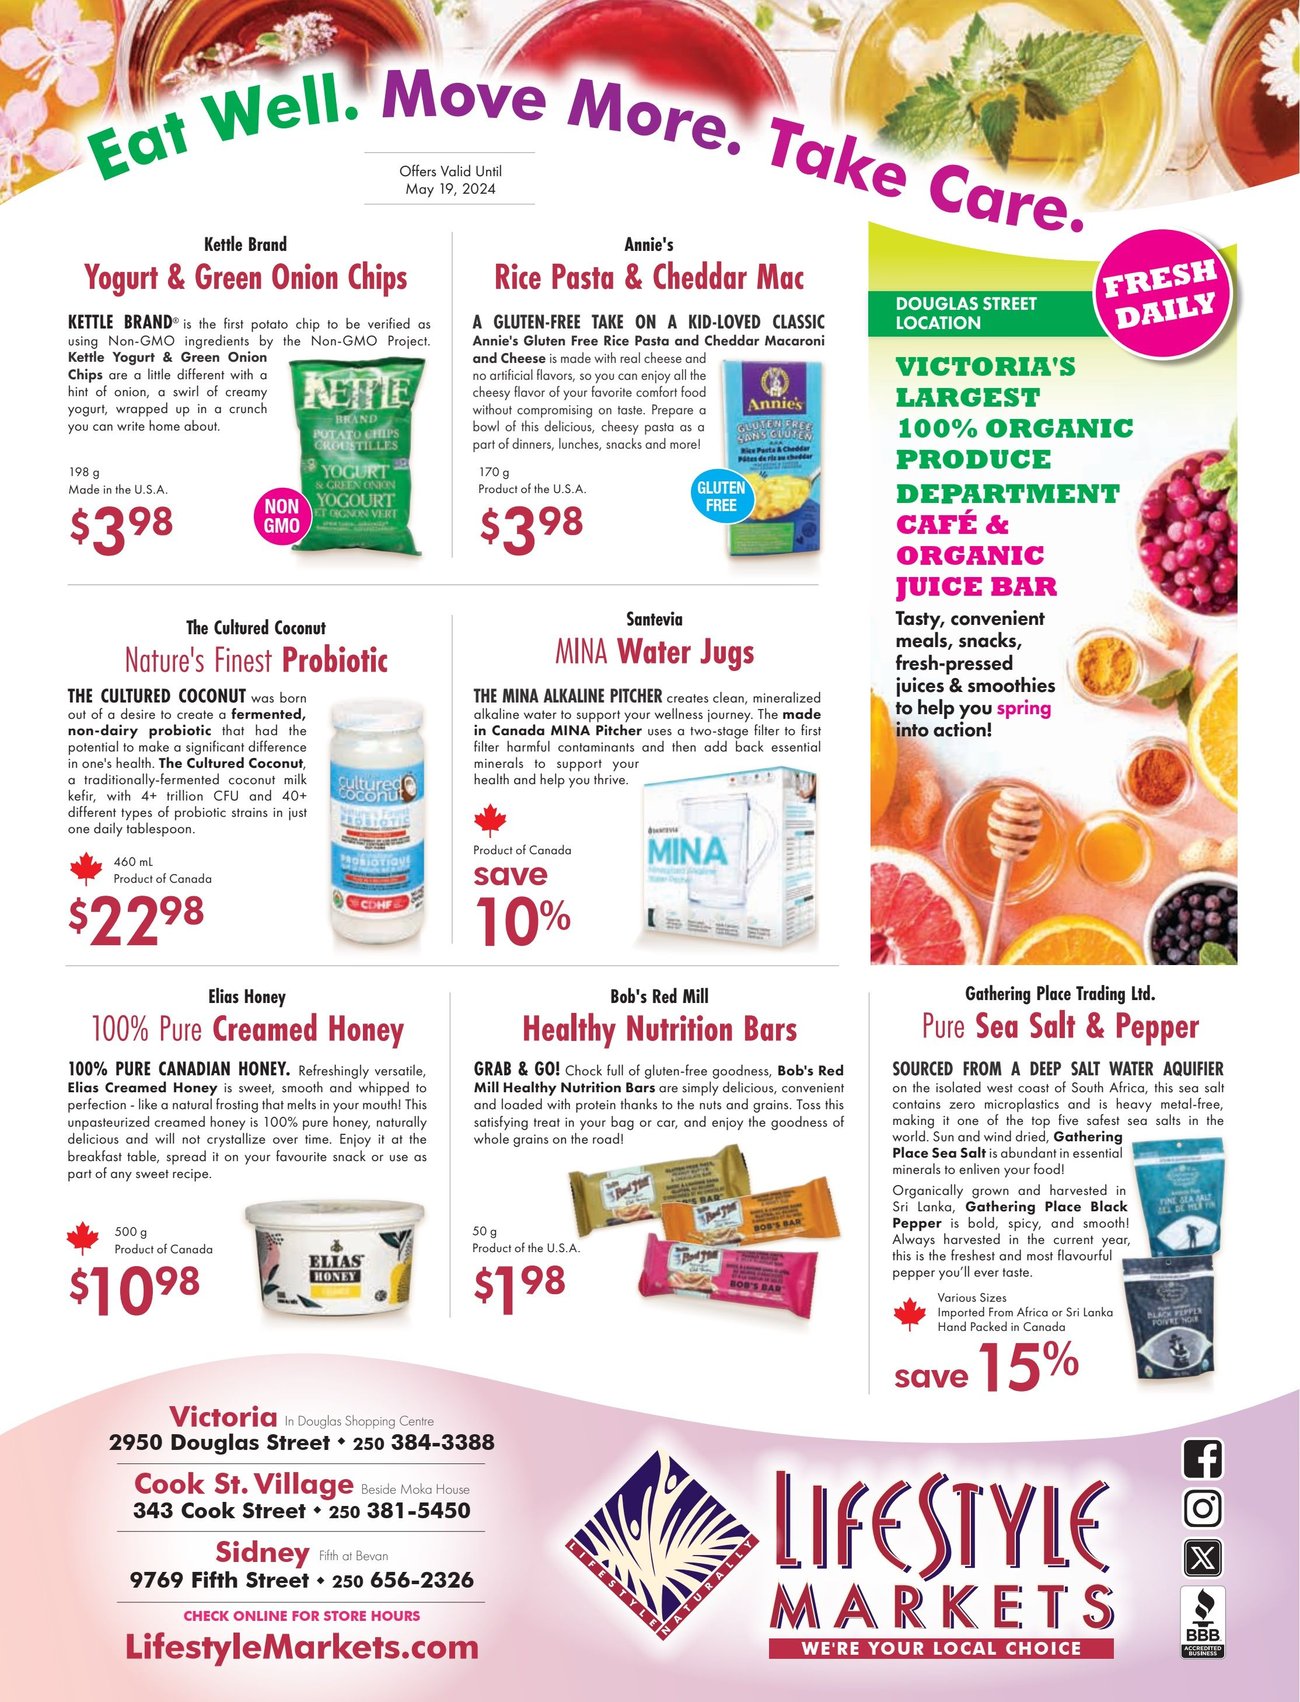 Lifestyle Markets -3 Weeks of Savings - Page 2